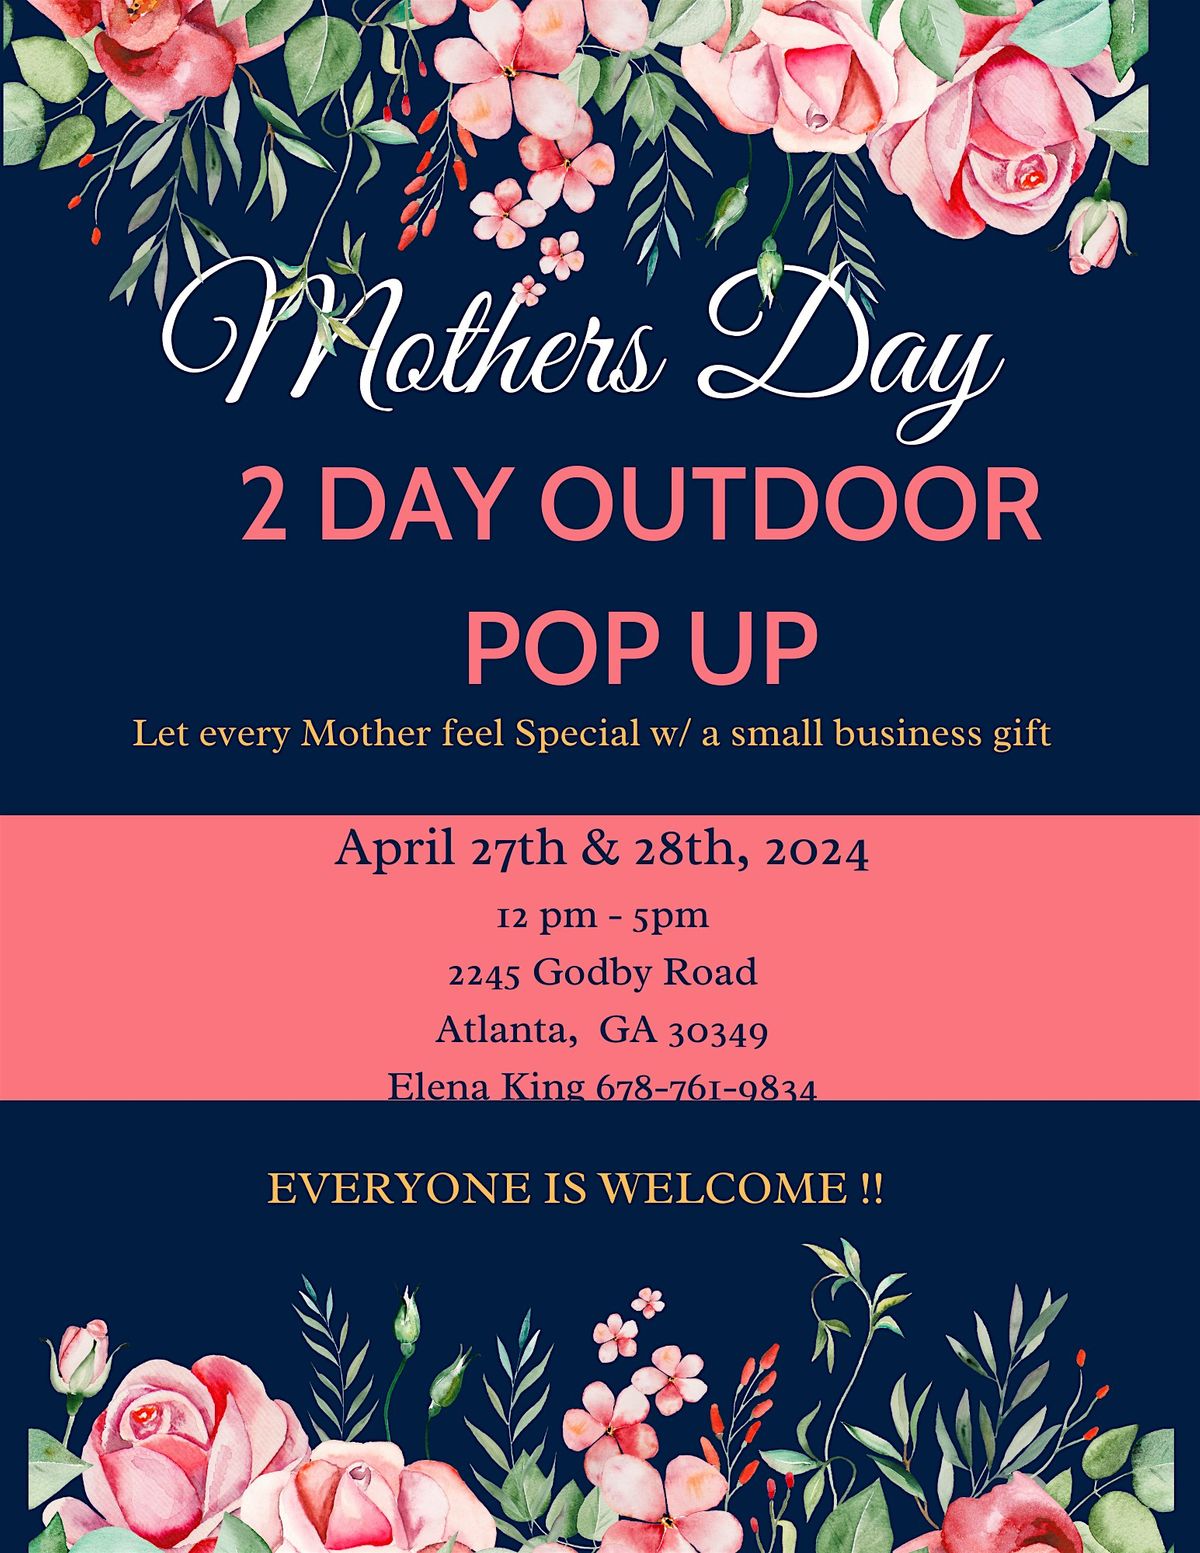 Mother's Day 2 Day Outdoor Pop Up